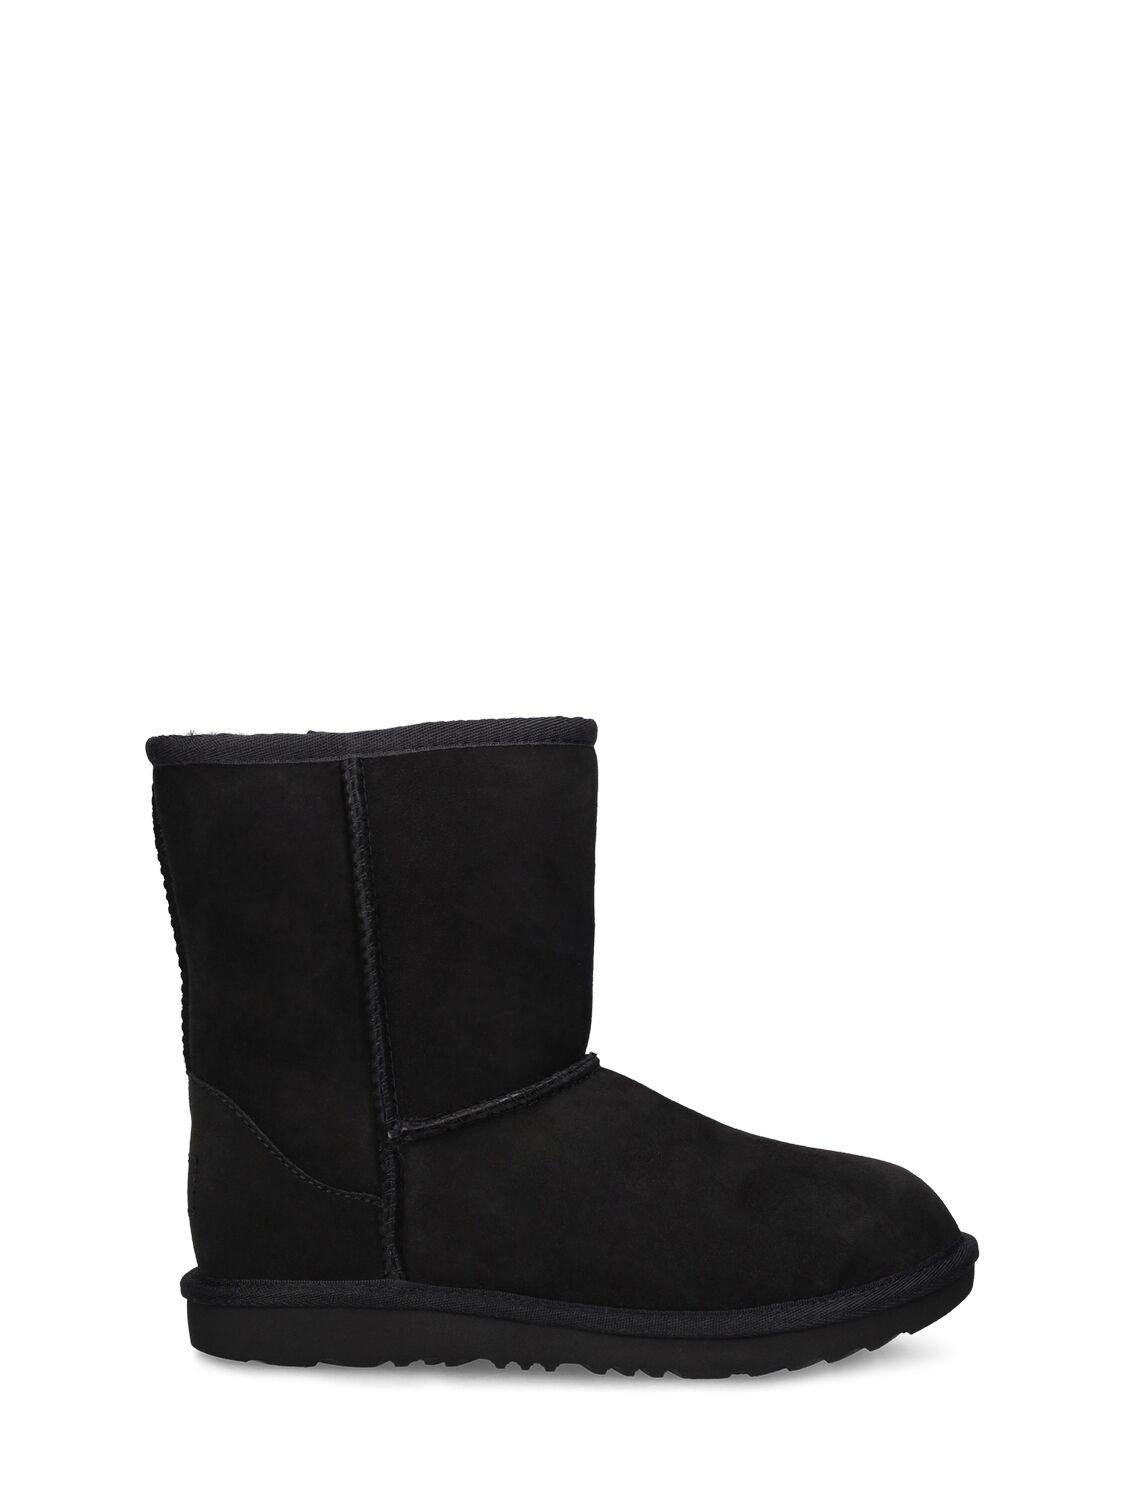 Classic Ii Shearling Boots by UGG